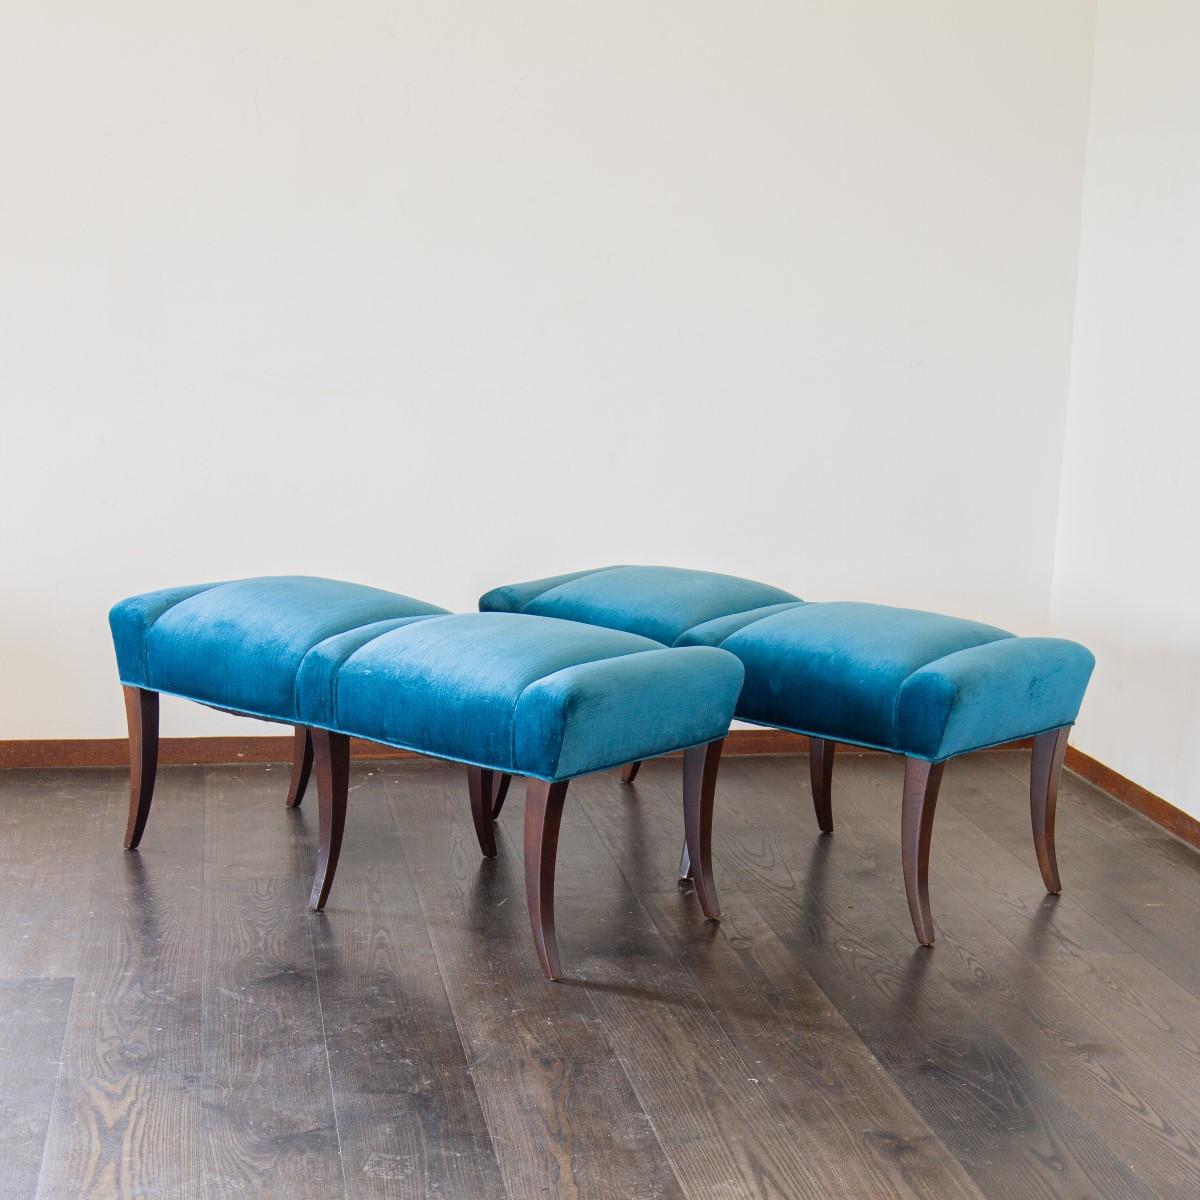 A modern pair of two seater benches/stools in the manner of Parzinger, upholstered in a blue velvet. Each Stool has six deep brown sabre legs. 

The velvet has some imperfections.

 

 